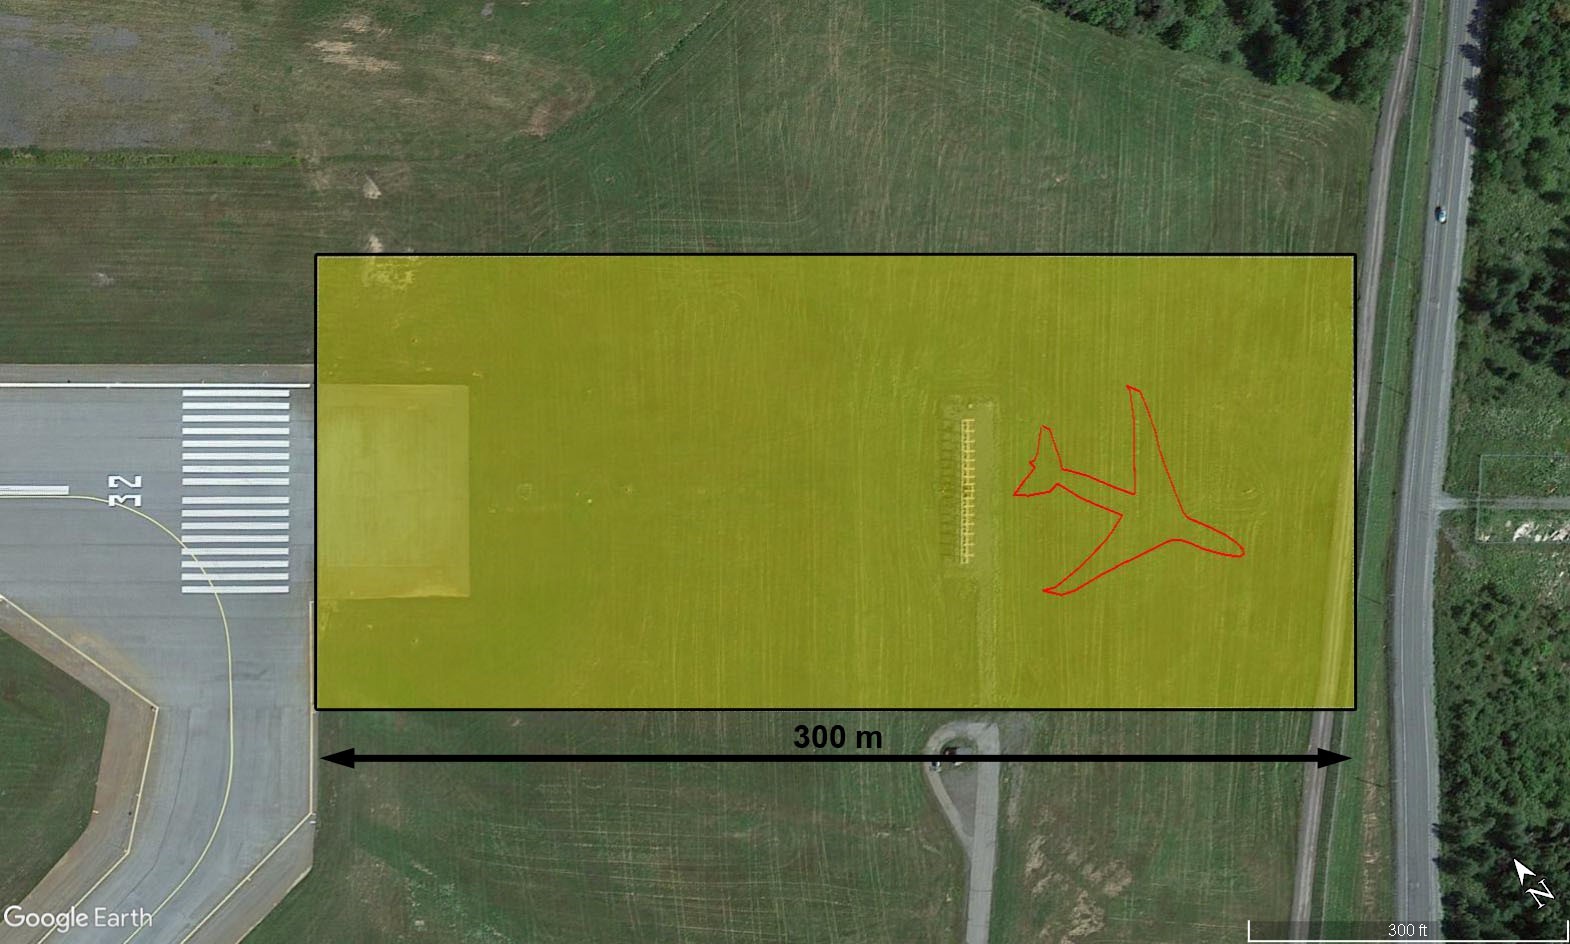 Depiction of International Civil Aviation Organization and TSB recommendation for runway end safety area on the occurrence runway, with the location of the occurrence aircraft after the runway overrun (Source: Google Earth, with TSB annotations)